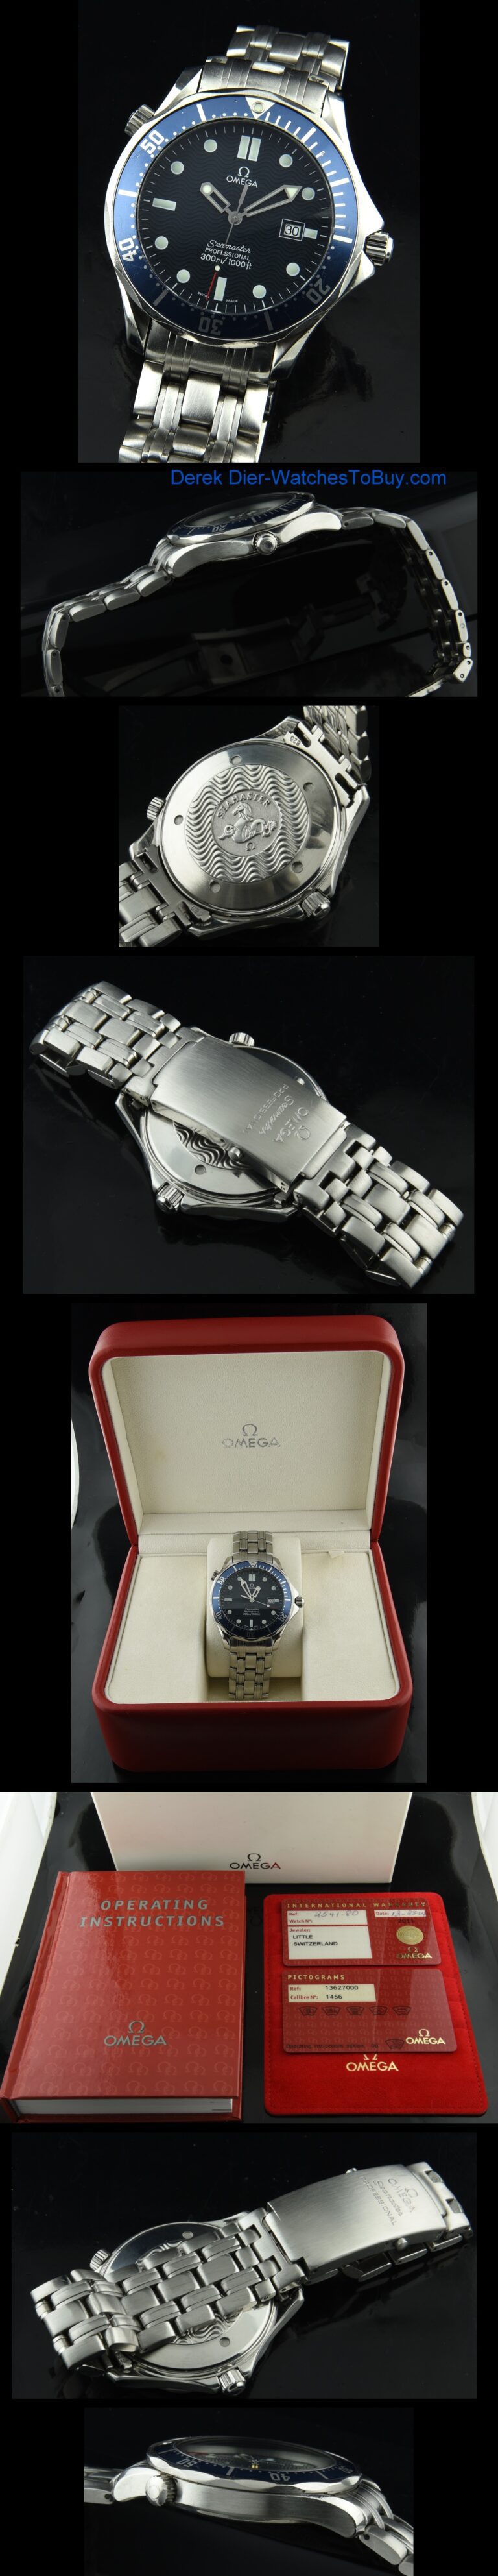 2004 Omega Seamaster James Bond stainless steel watch with original inner/outer box, booklet, warranty card, bracelet, and quartz movement.